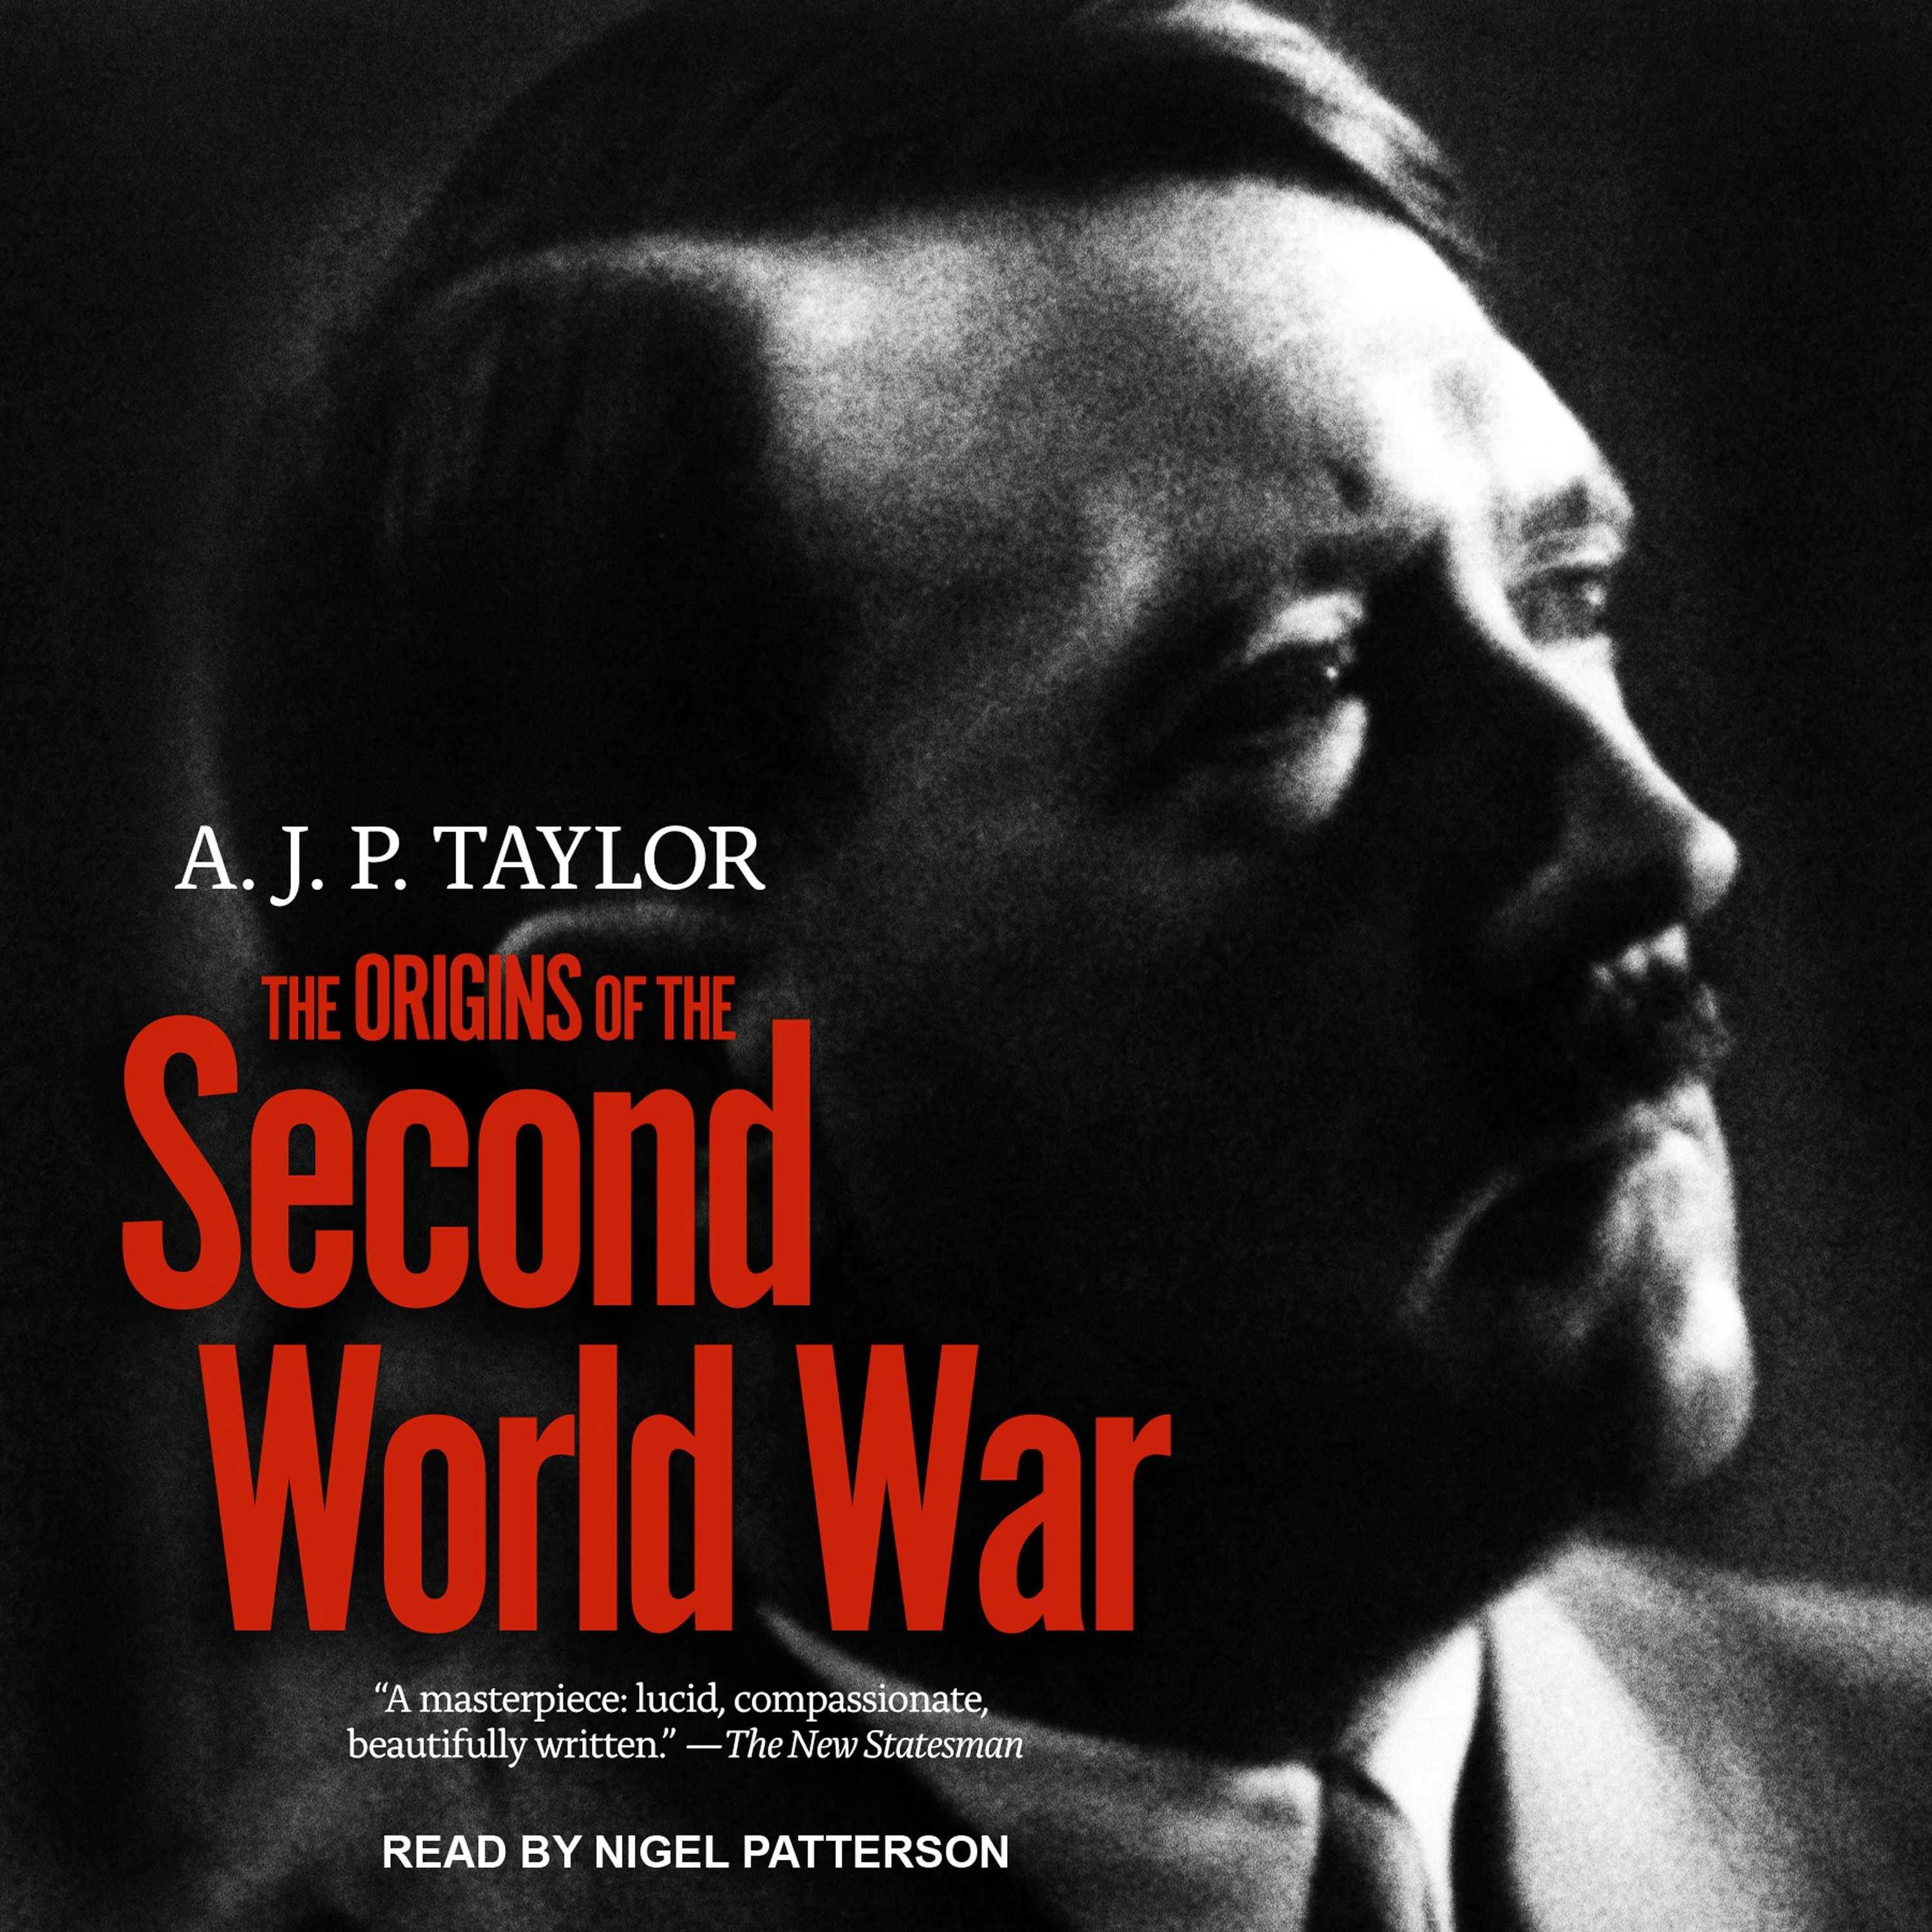 The Origins of The Second World War - A.J.P. Taylor